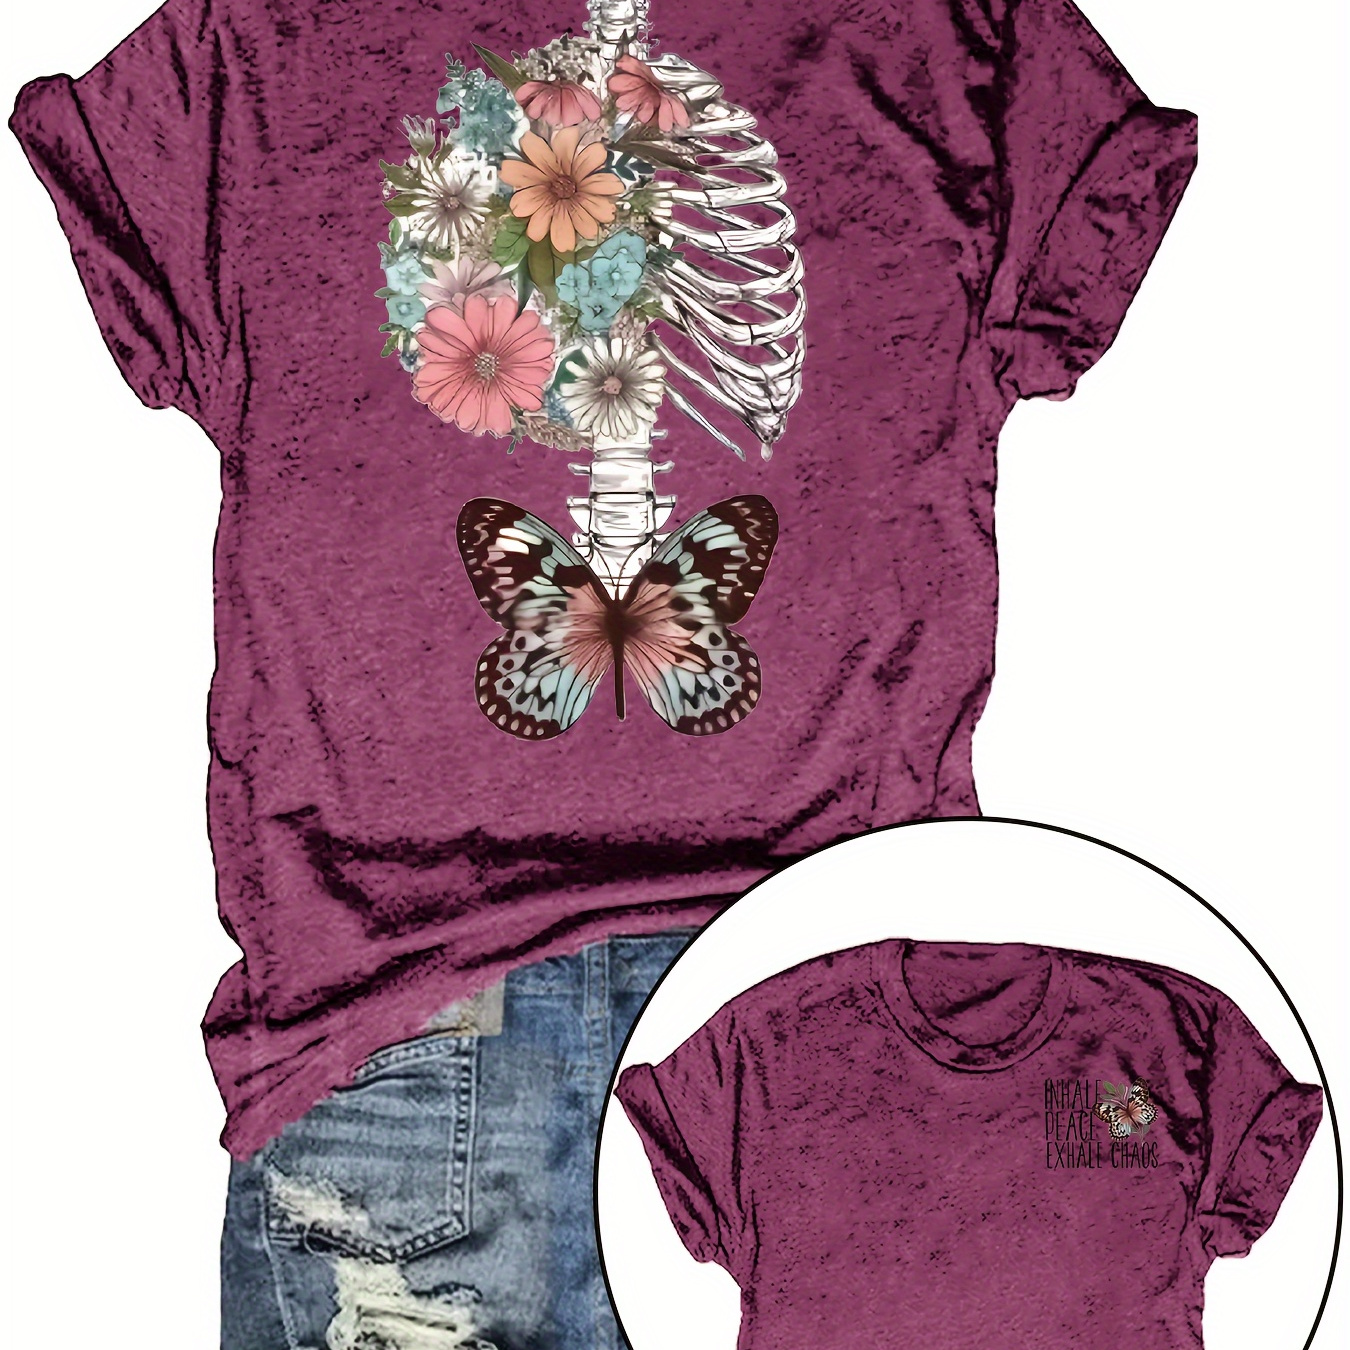 

Flowers Skeleton Print T-shirt, Short Sleeve Crew Neck Casual Top For Summer & Spring, Women's Clothing